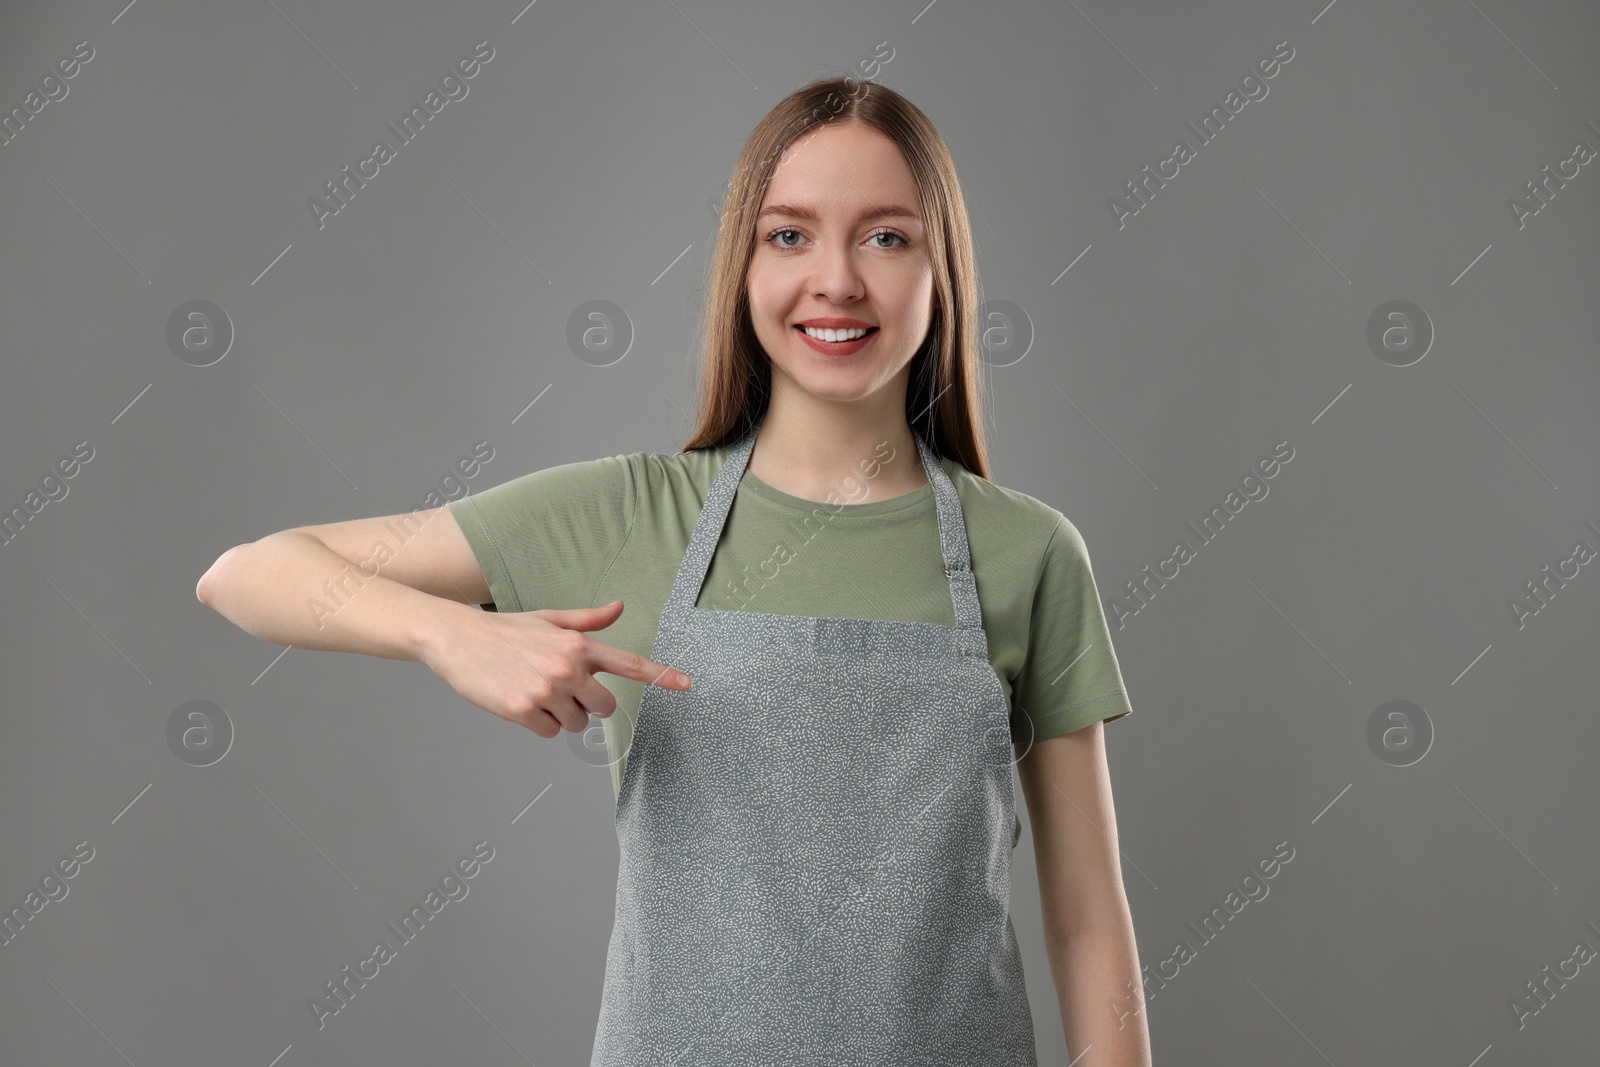 Photo of Beautiful young woman pointing at kitchen apron on grey background. Mockup for design